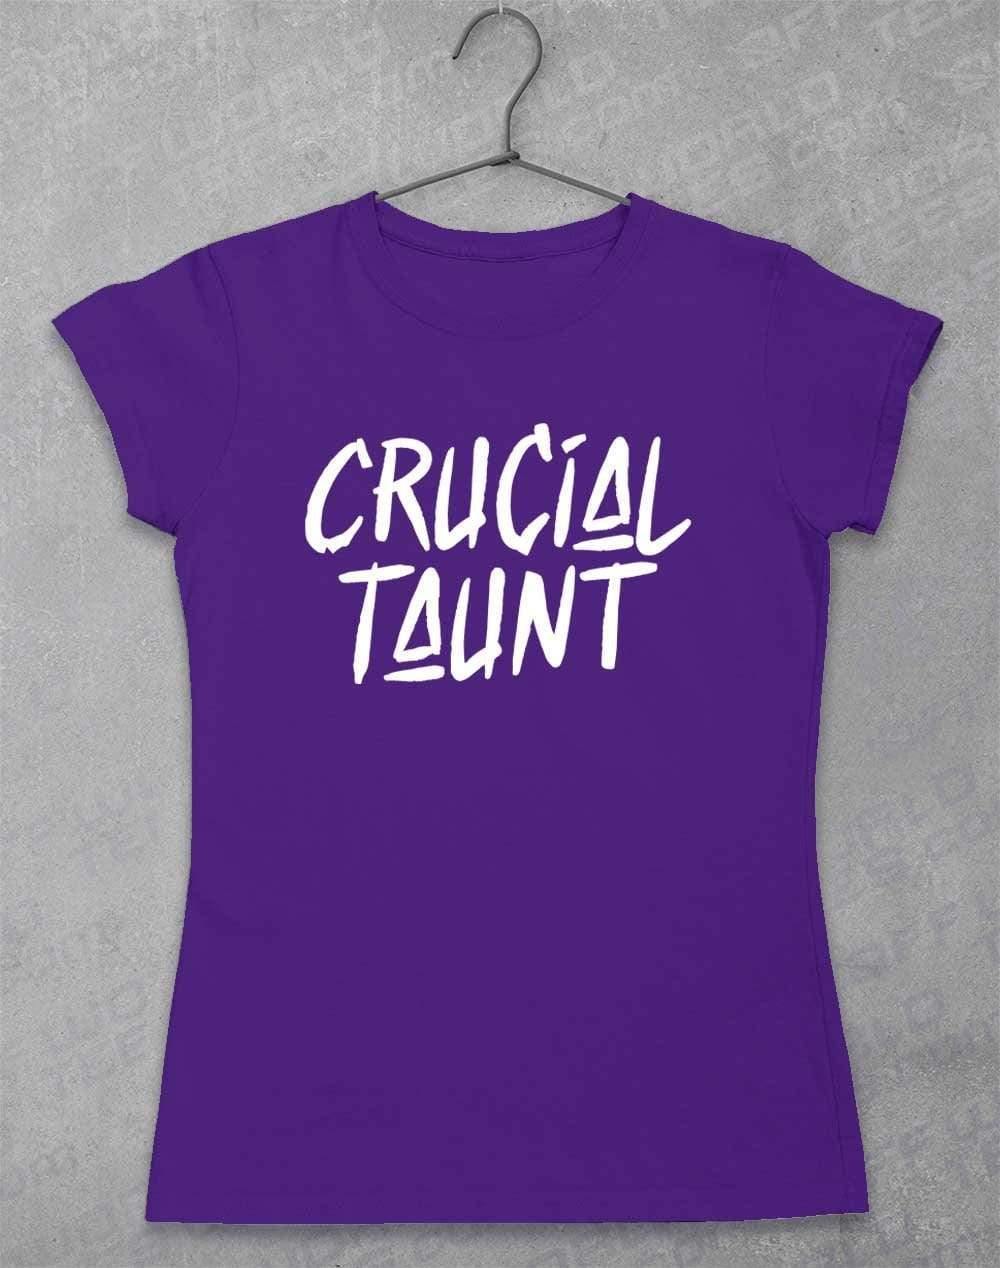 Crucial Taunt Womens T-Shirt 8-10 / Lilac  - Off World Tees